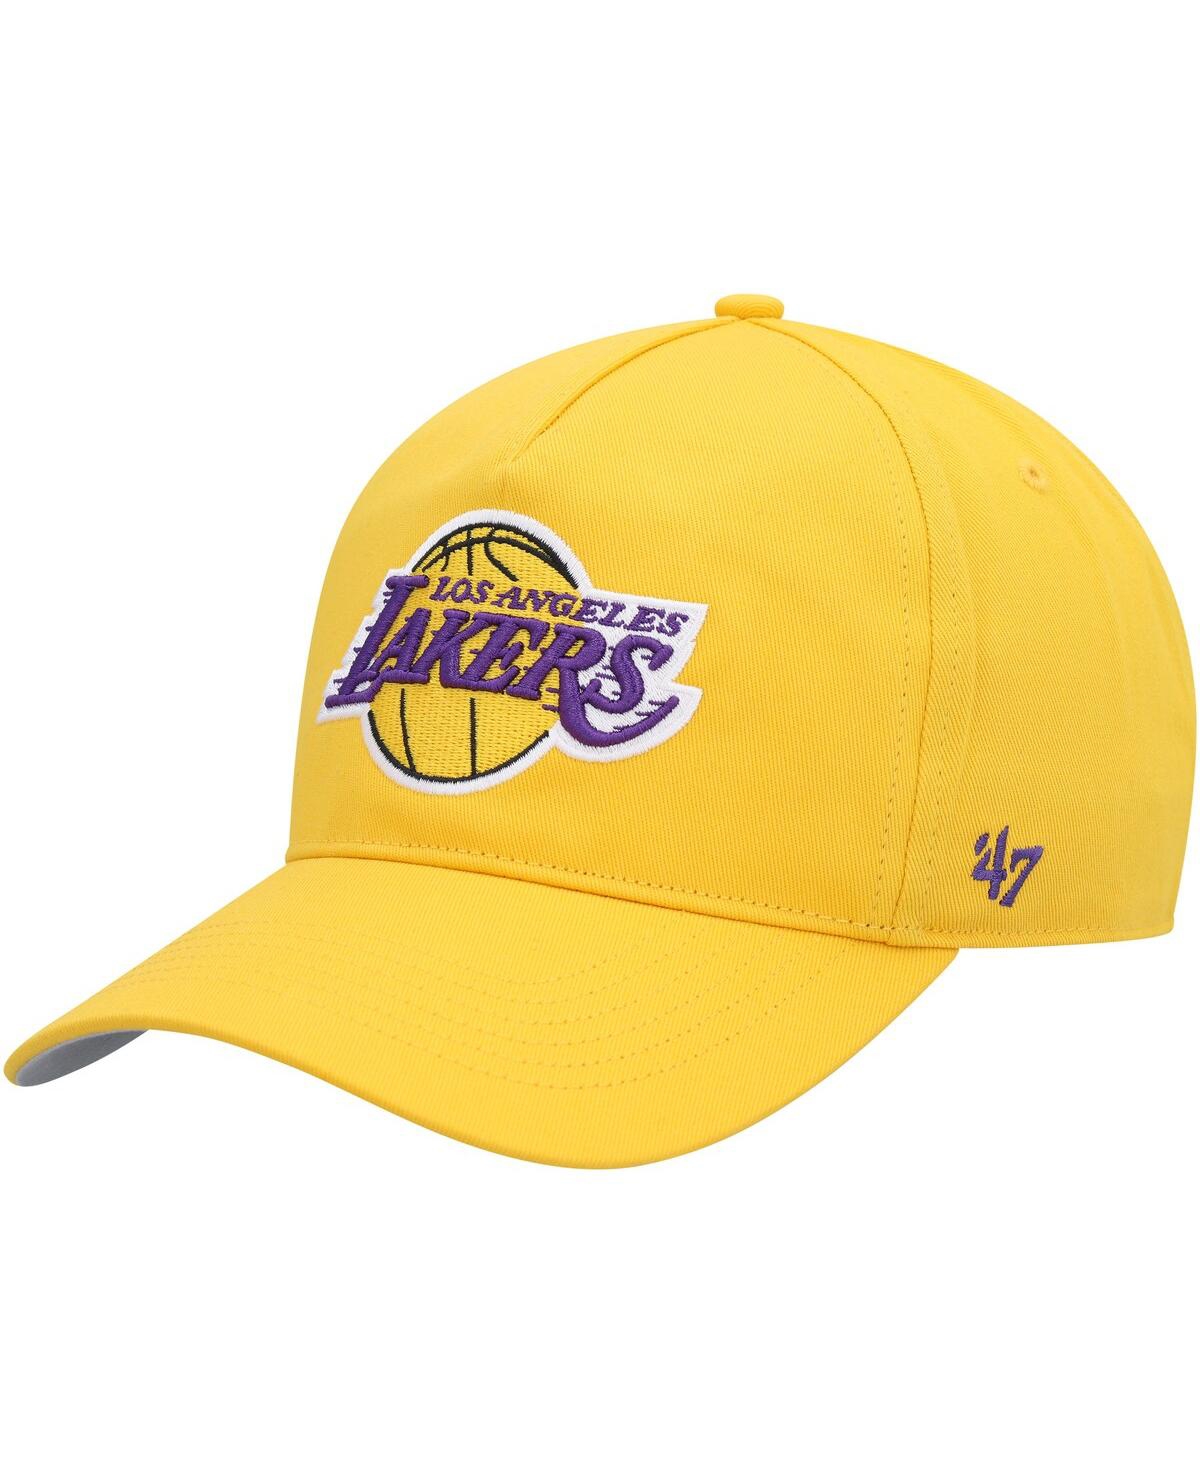 47 BRAND MEN'S '47 BRAND GOLD LOS ANGELES LAKERS HITCH SNAPBACK HAT